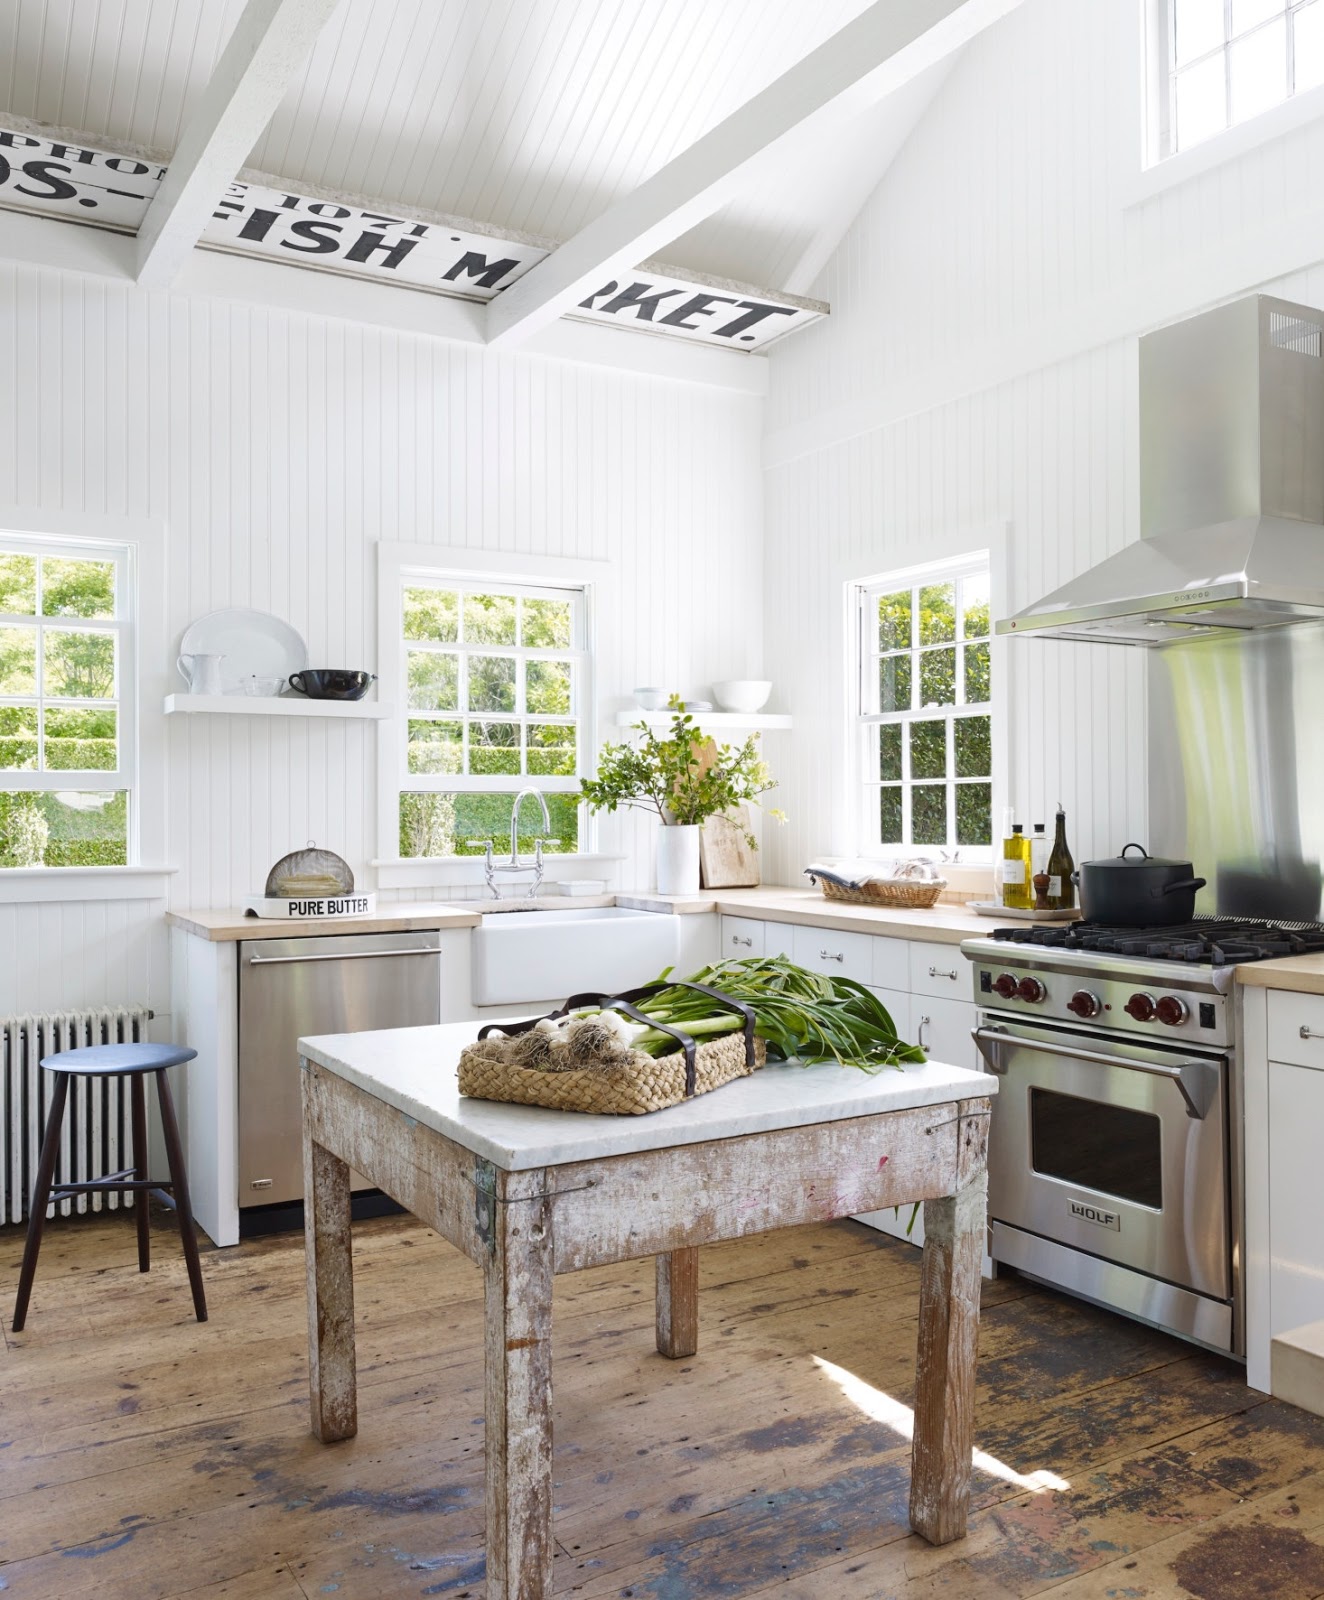 Décor Inspiration: A Bright & Breezy Home in the Hamptons